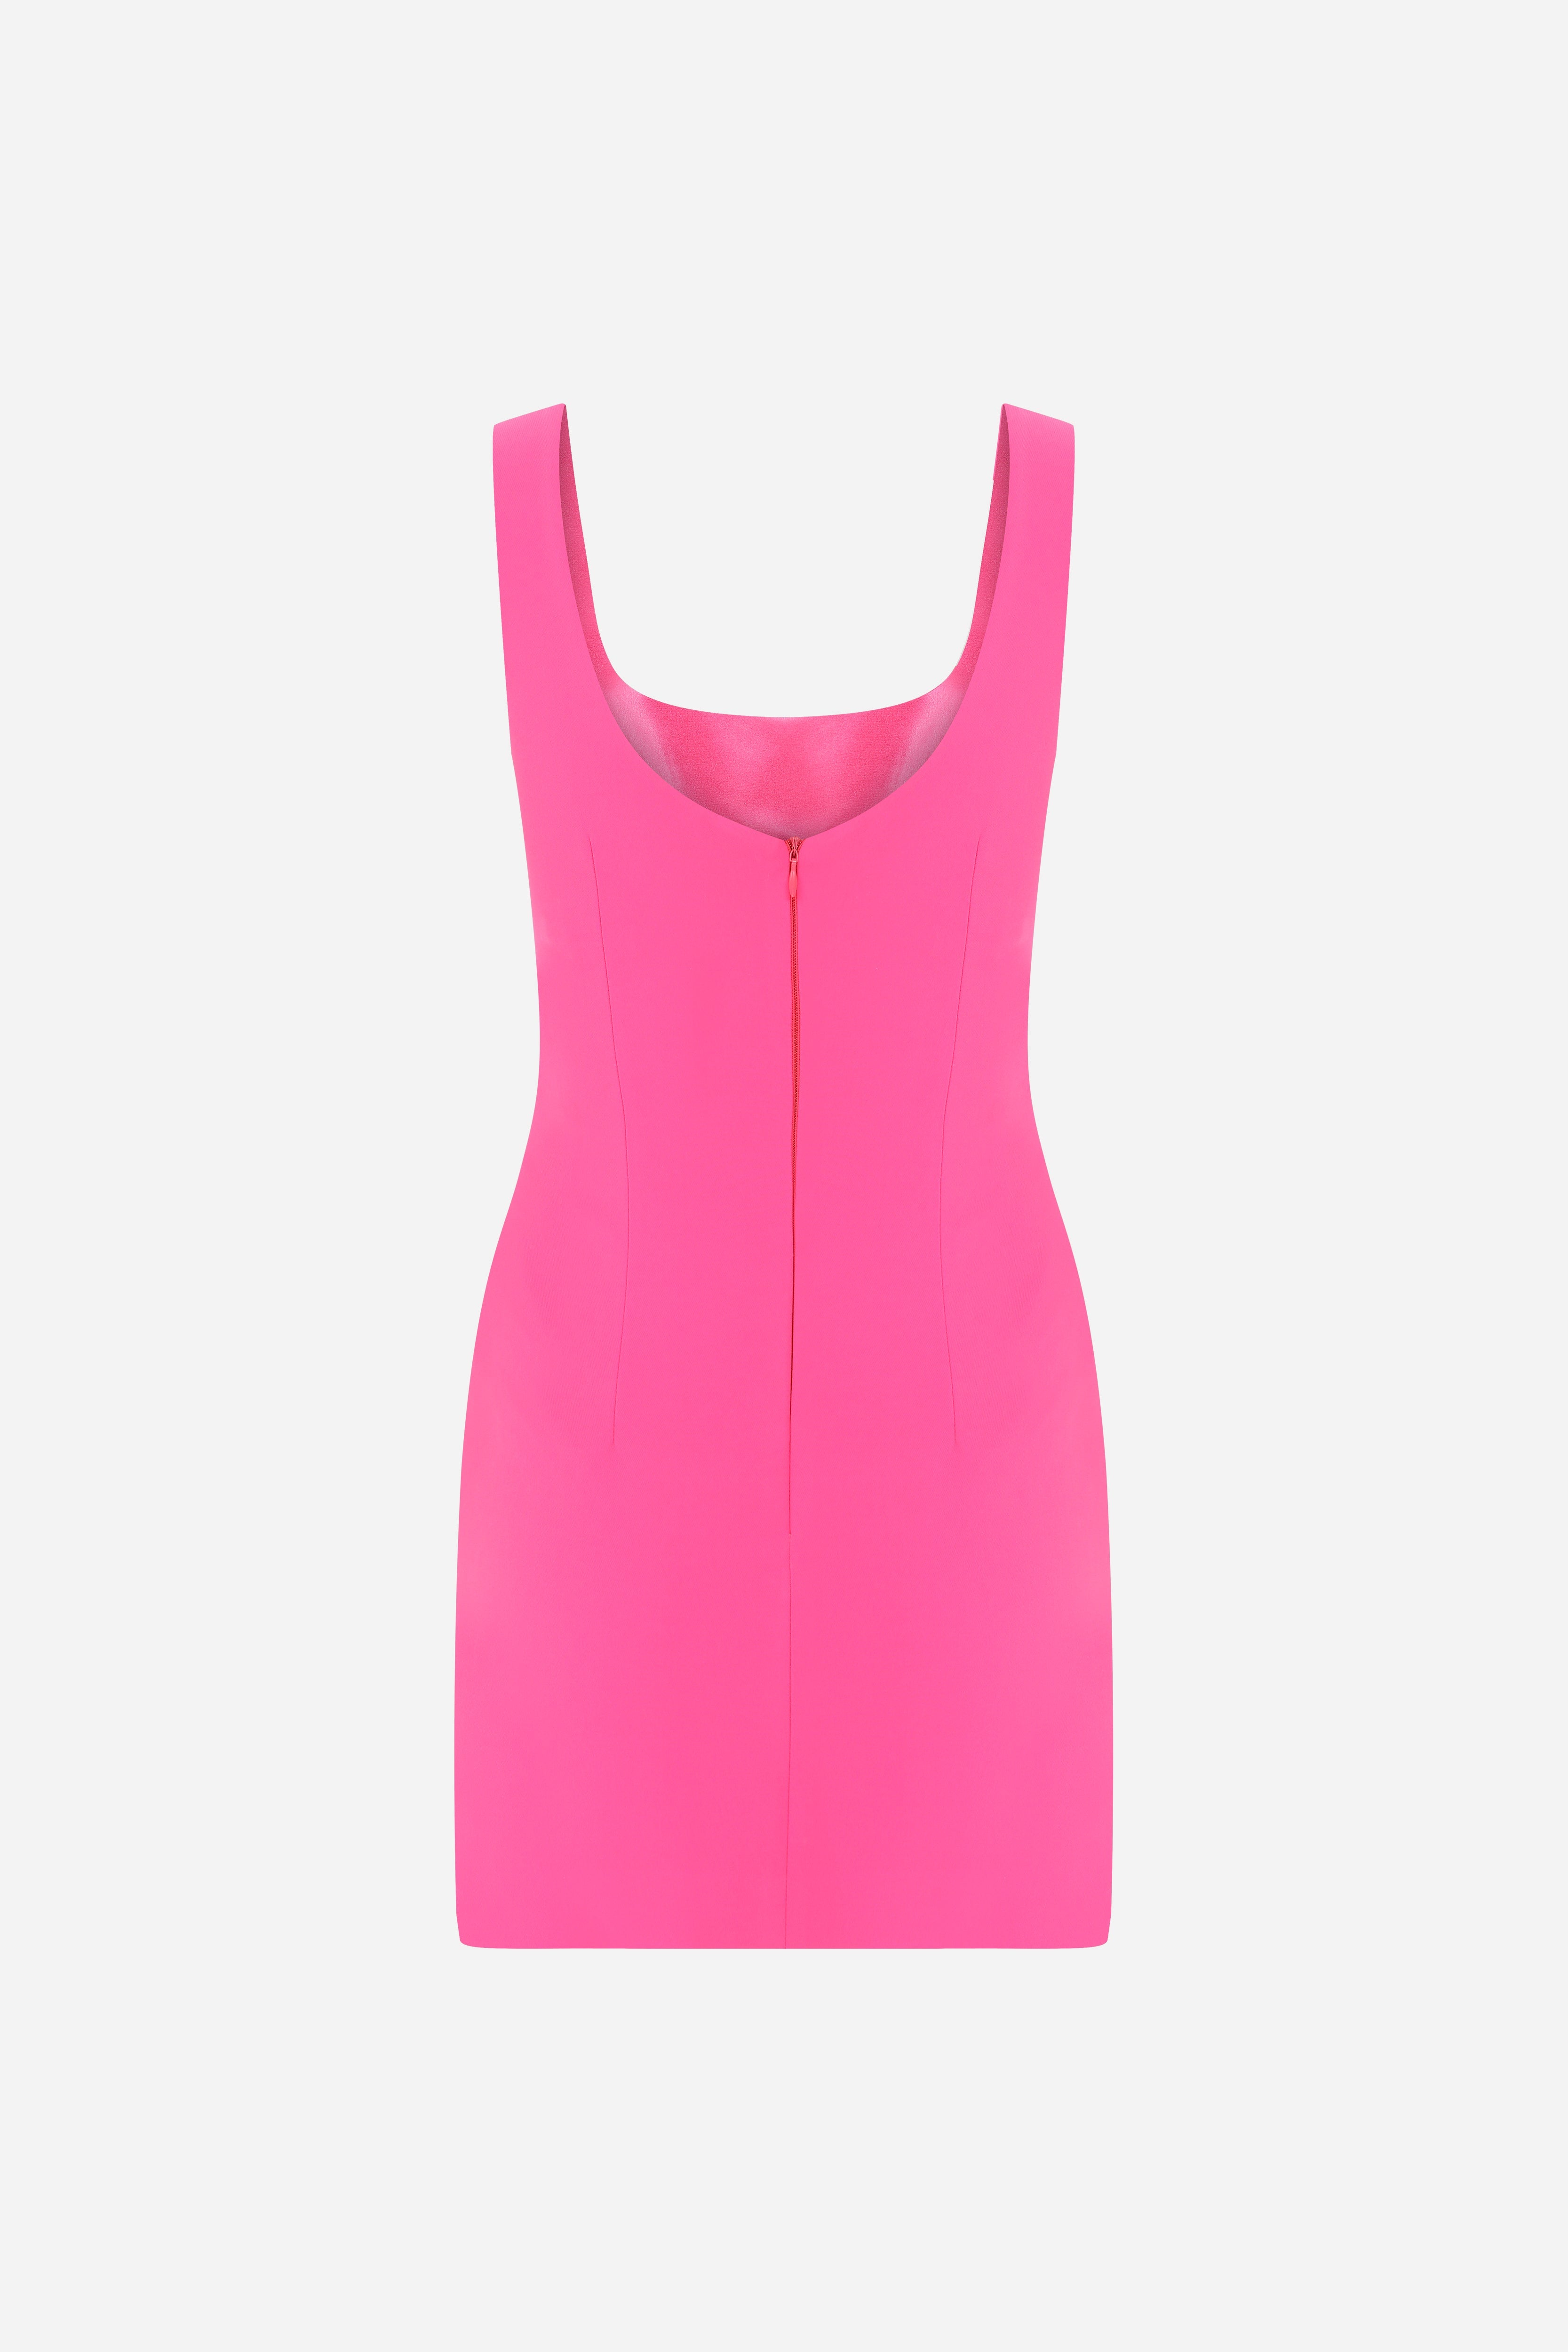 ISADORA - U neck mini dress with front slit in pink